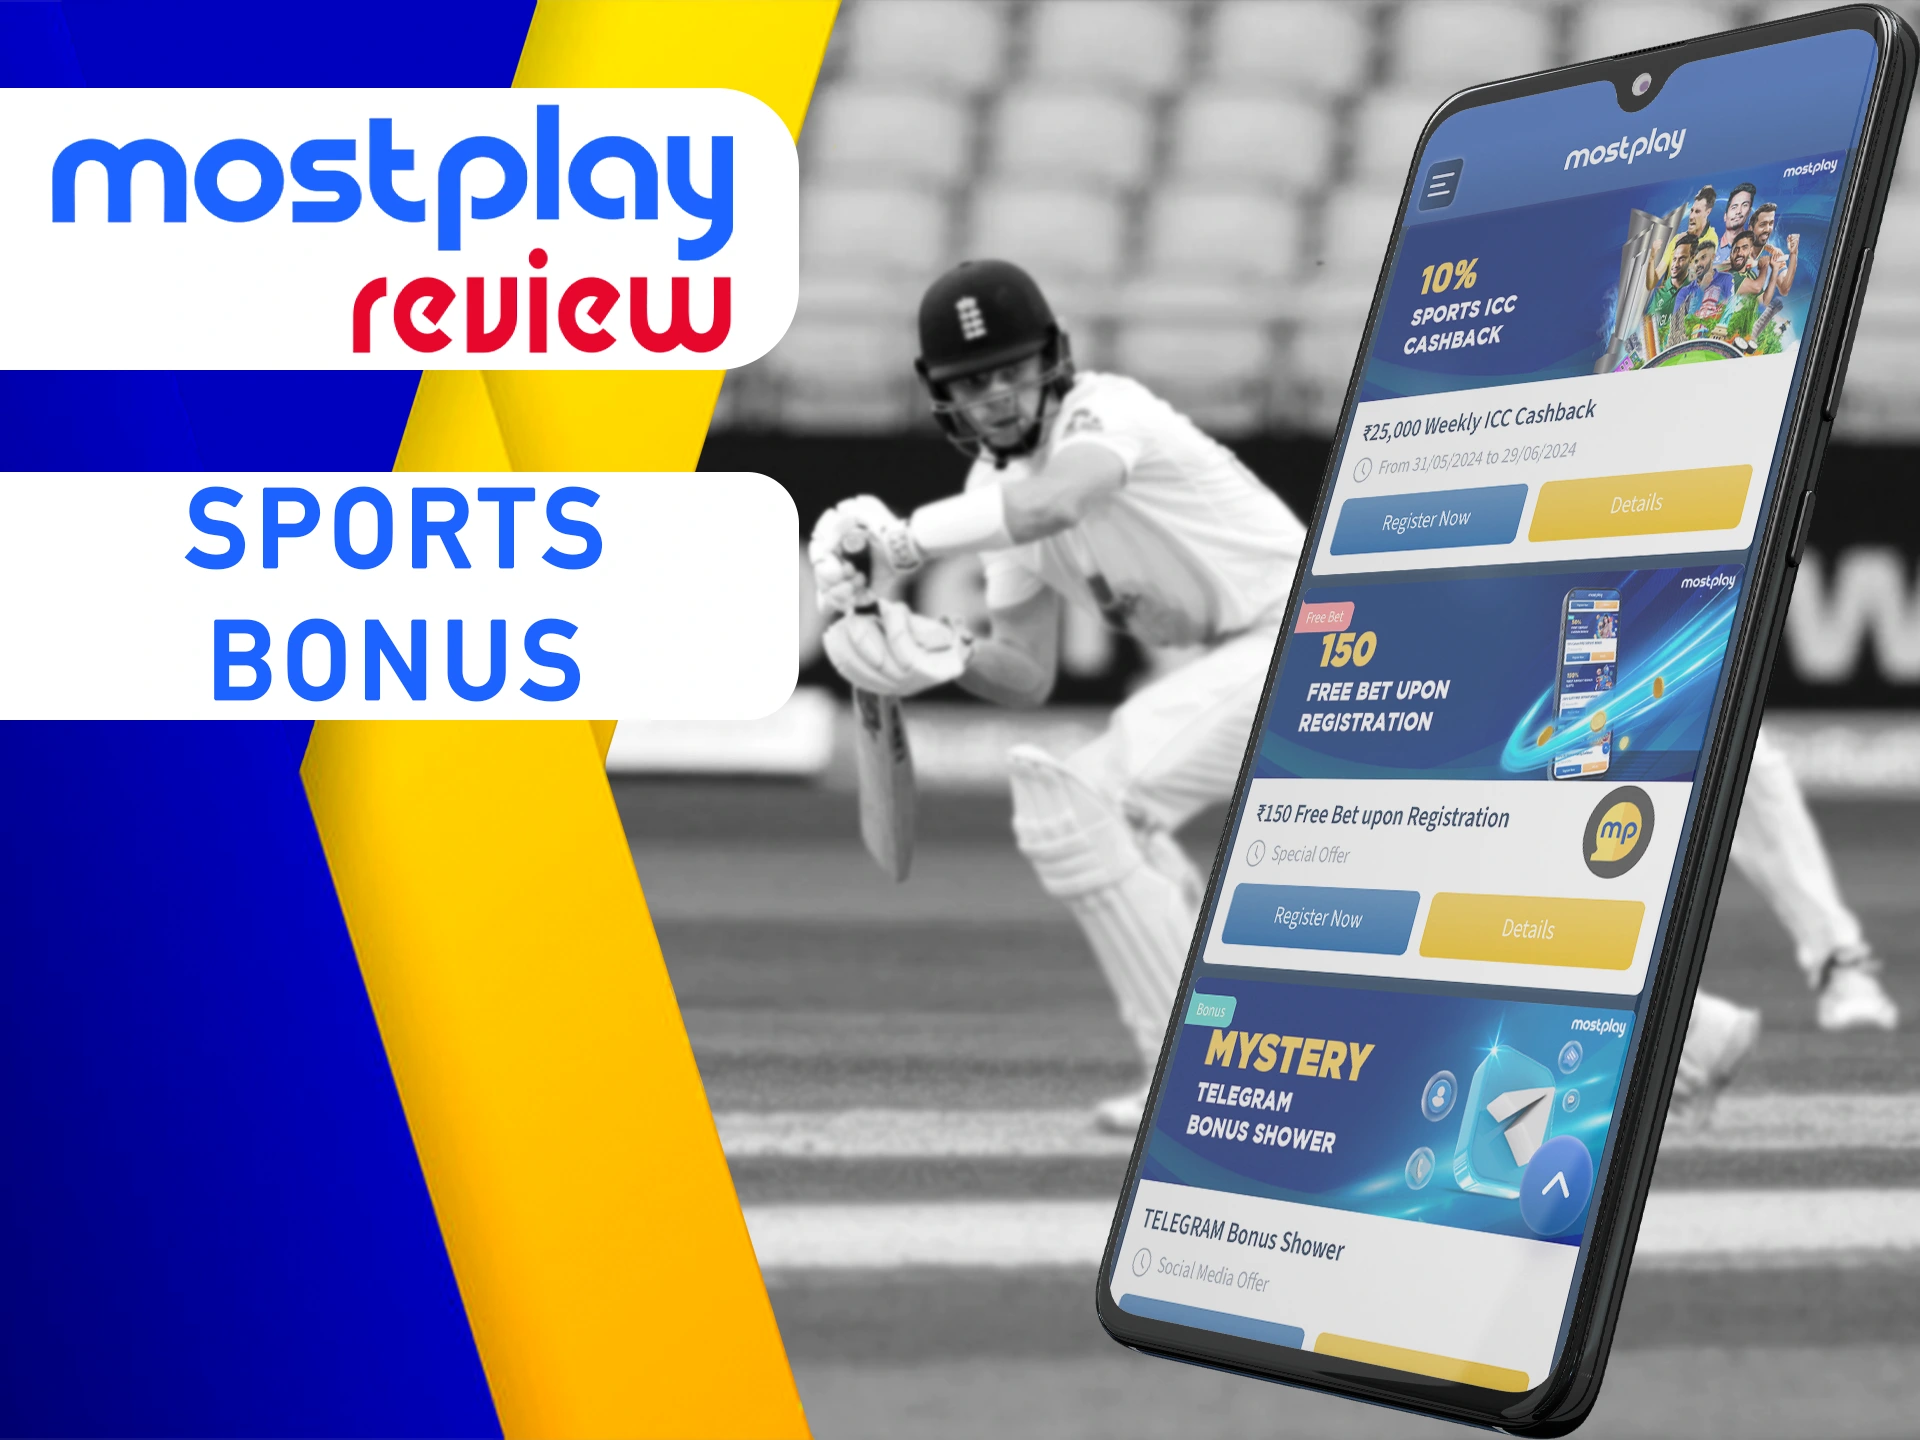 Bet on sports and get exclusive Mostplay sports bonus.